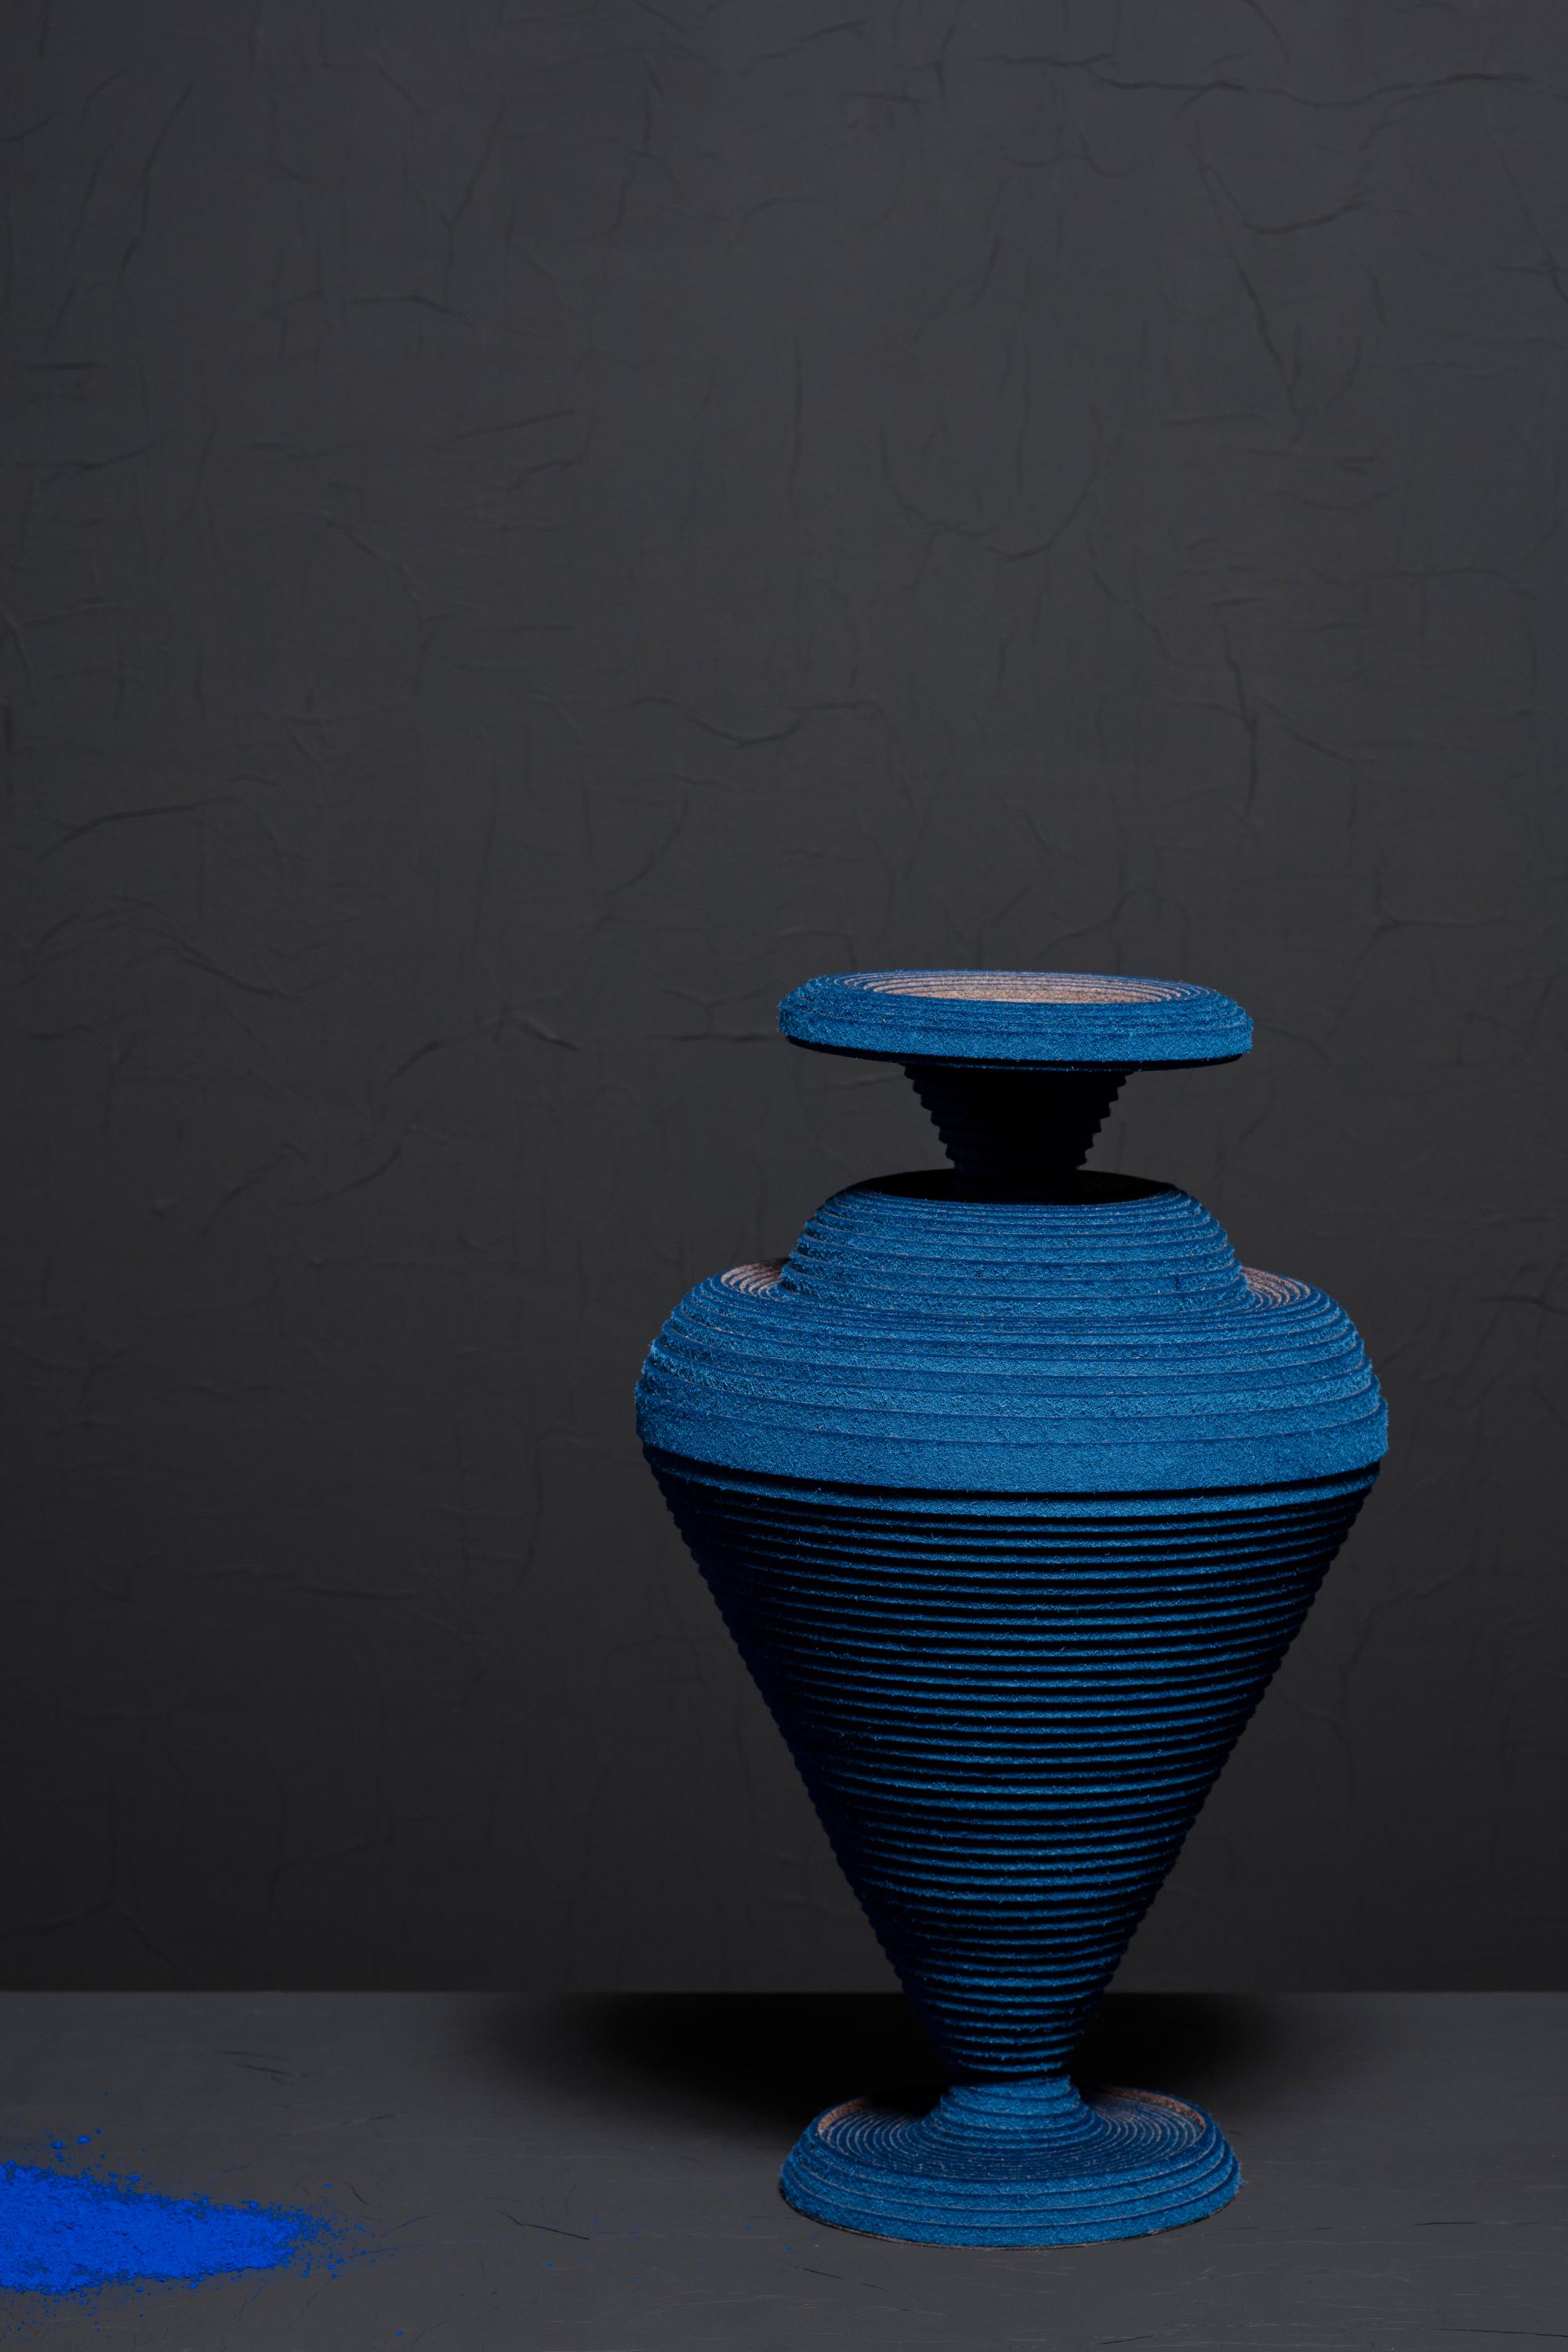 Blue Alchemy vase by Siba Sahabi
Limited edition of: 36 of each design + 2 AP + 1 P
Vase N.I: 48 x 32 x 32 cm
Signed and numbered.


Referencing the first man-made pigment that was developed as early as 2600 BCE, Blue Alchemy is the new bright